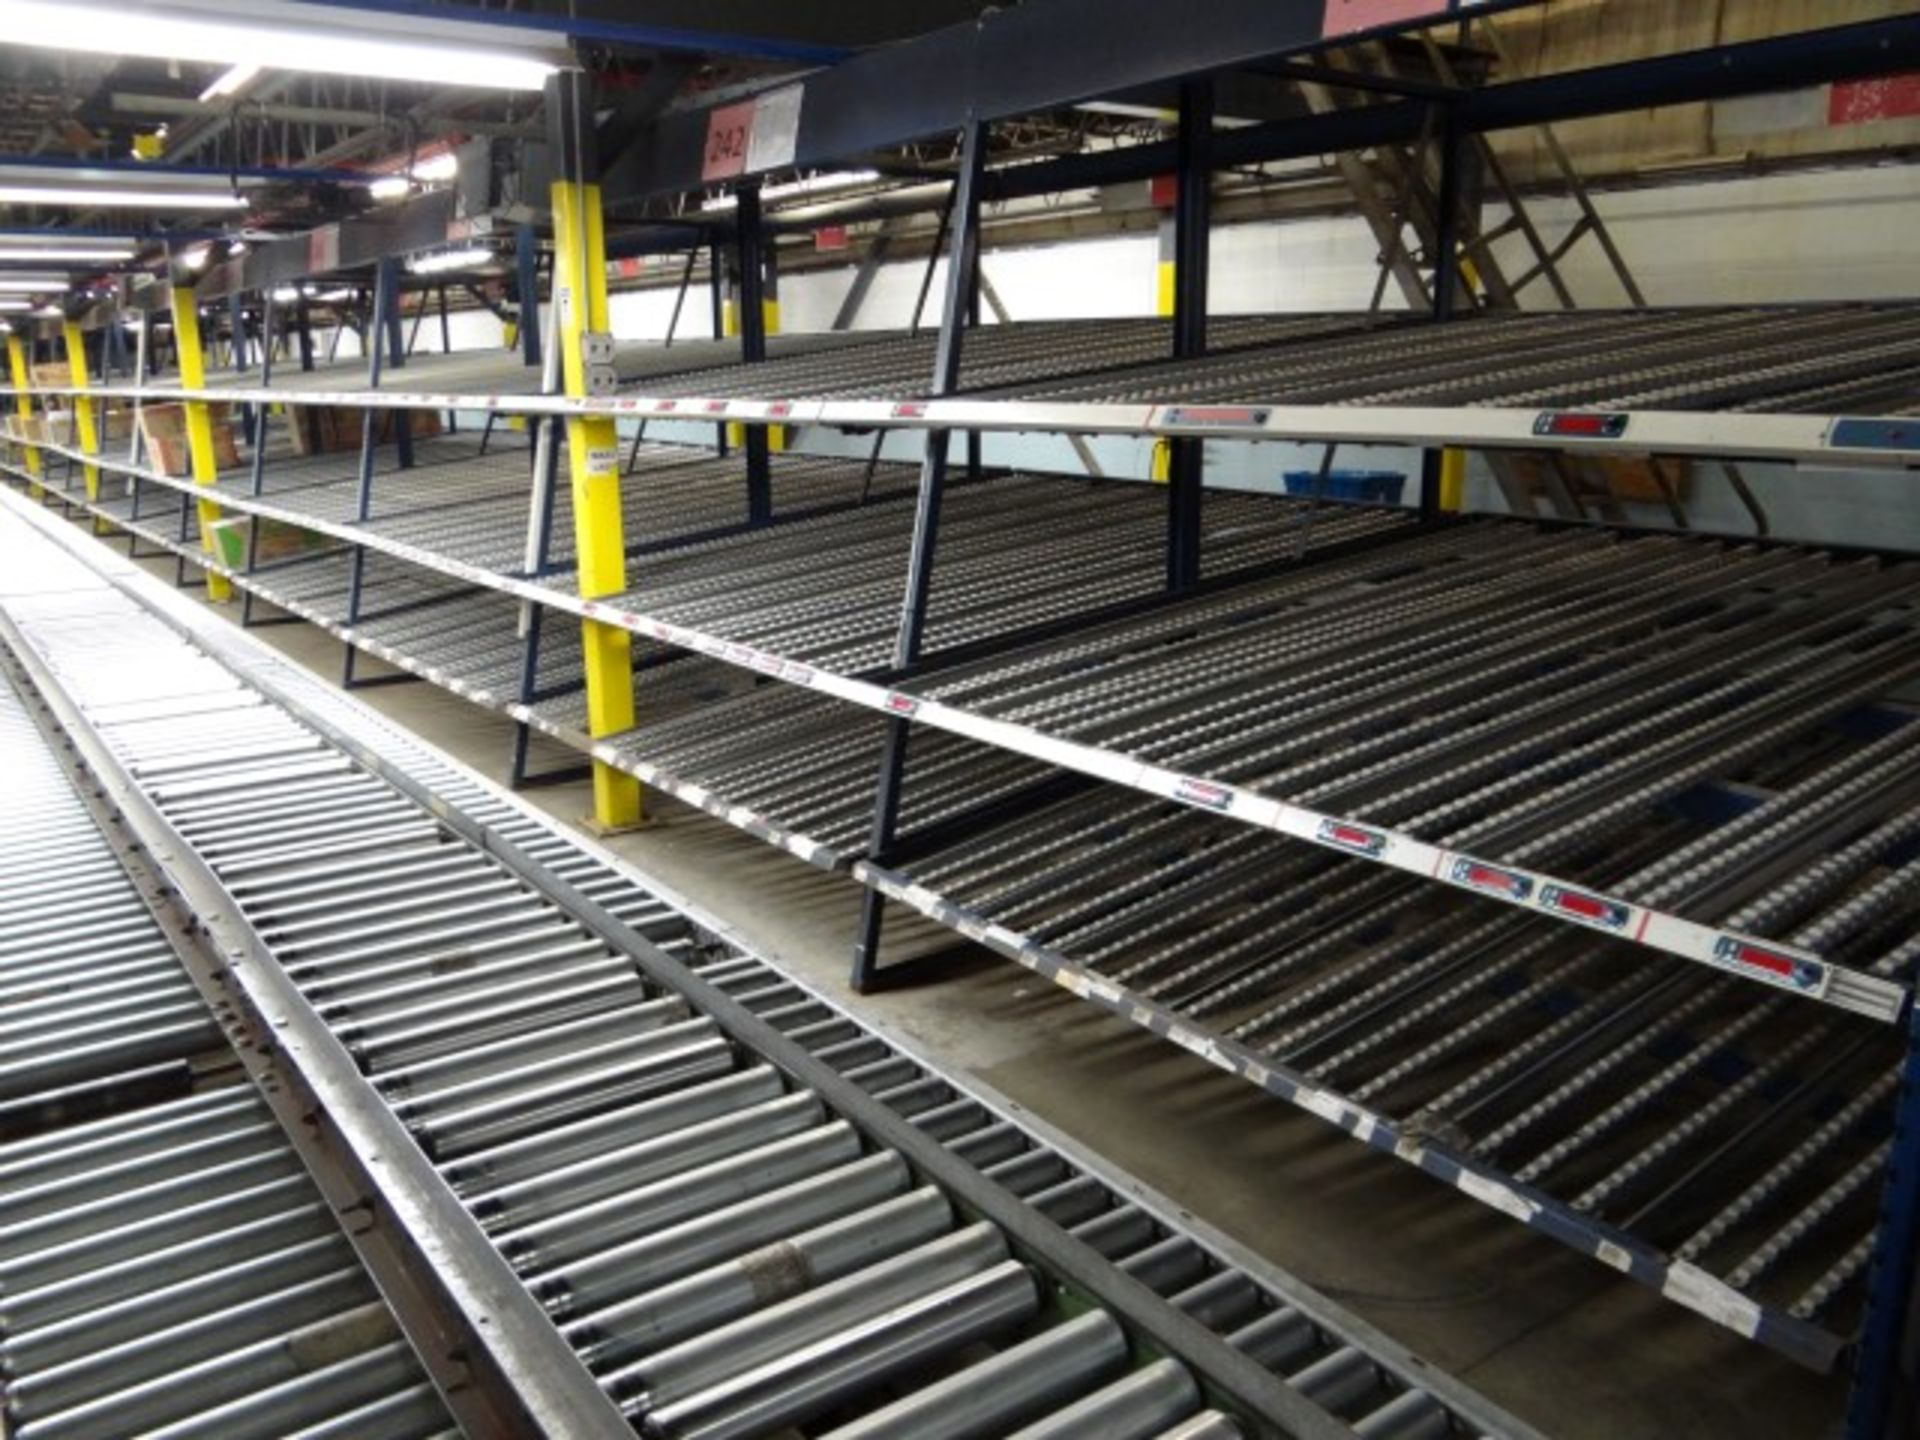 Tech King Cigarette Pick to Light System with 6 Pick Stations, Conveyors, Flow Racks, Box Tram and - Image 54 of 57